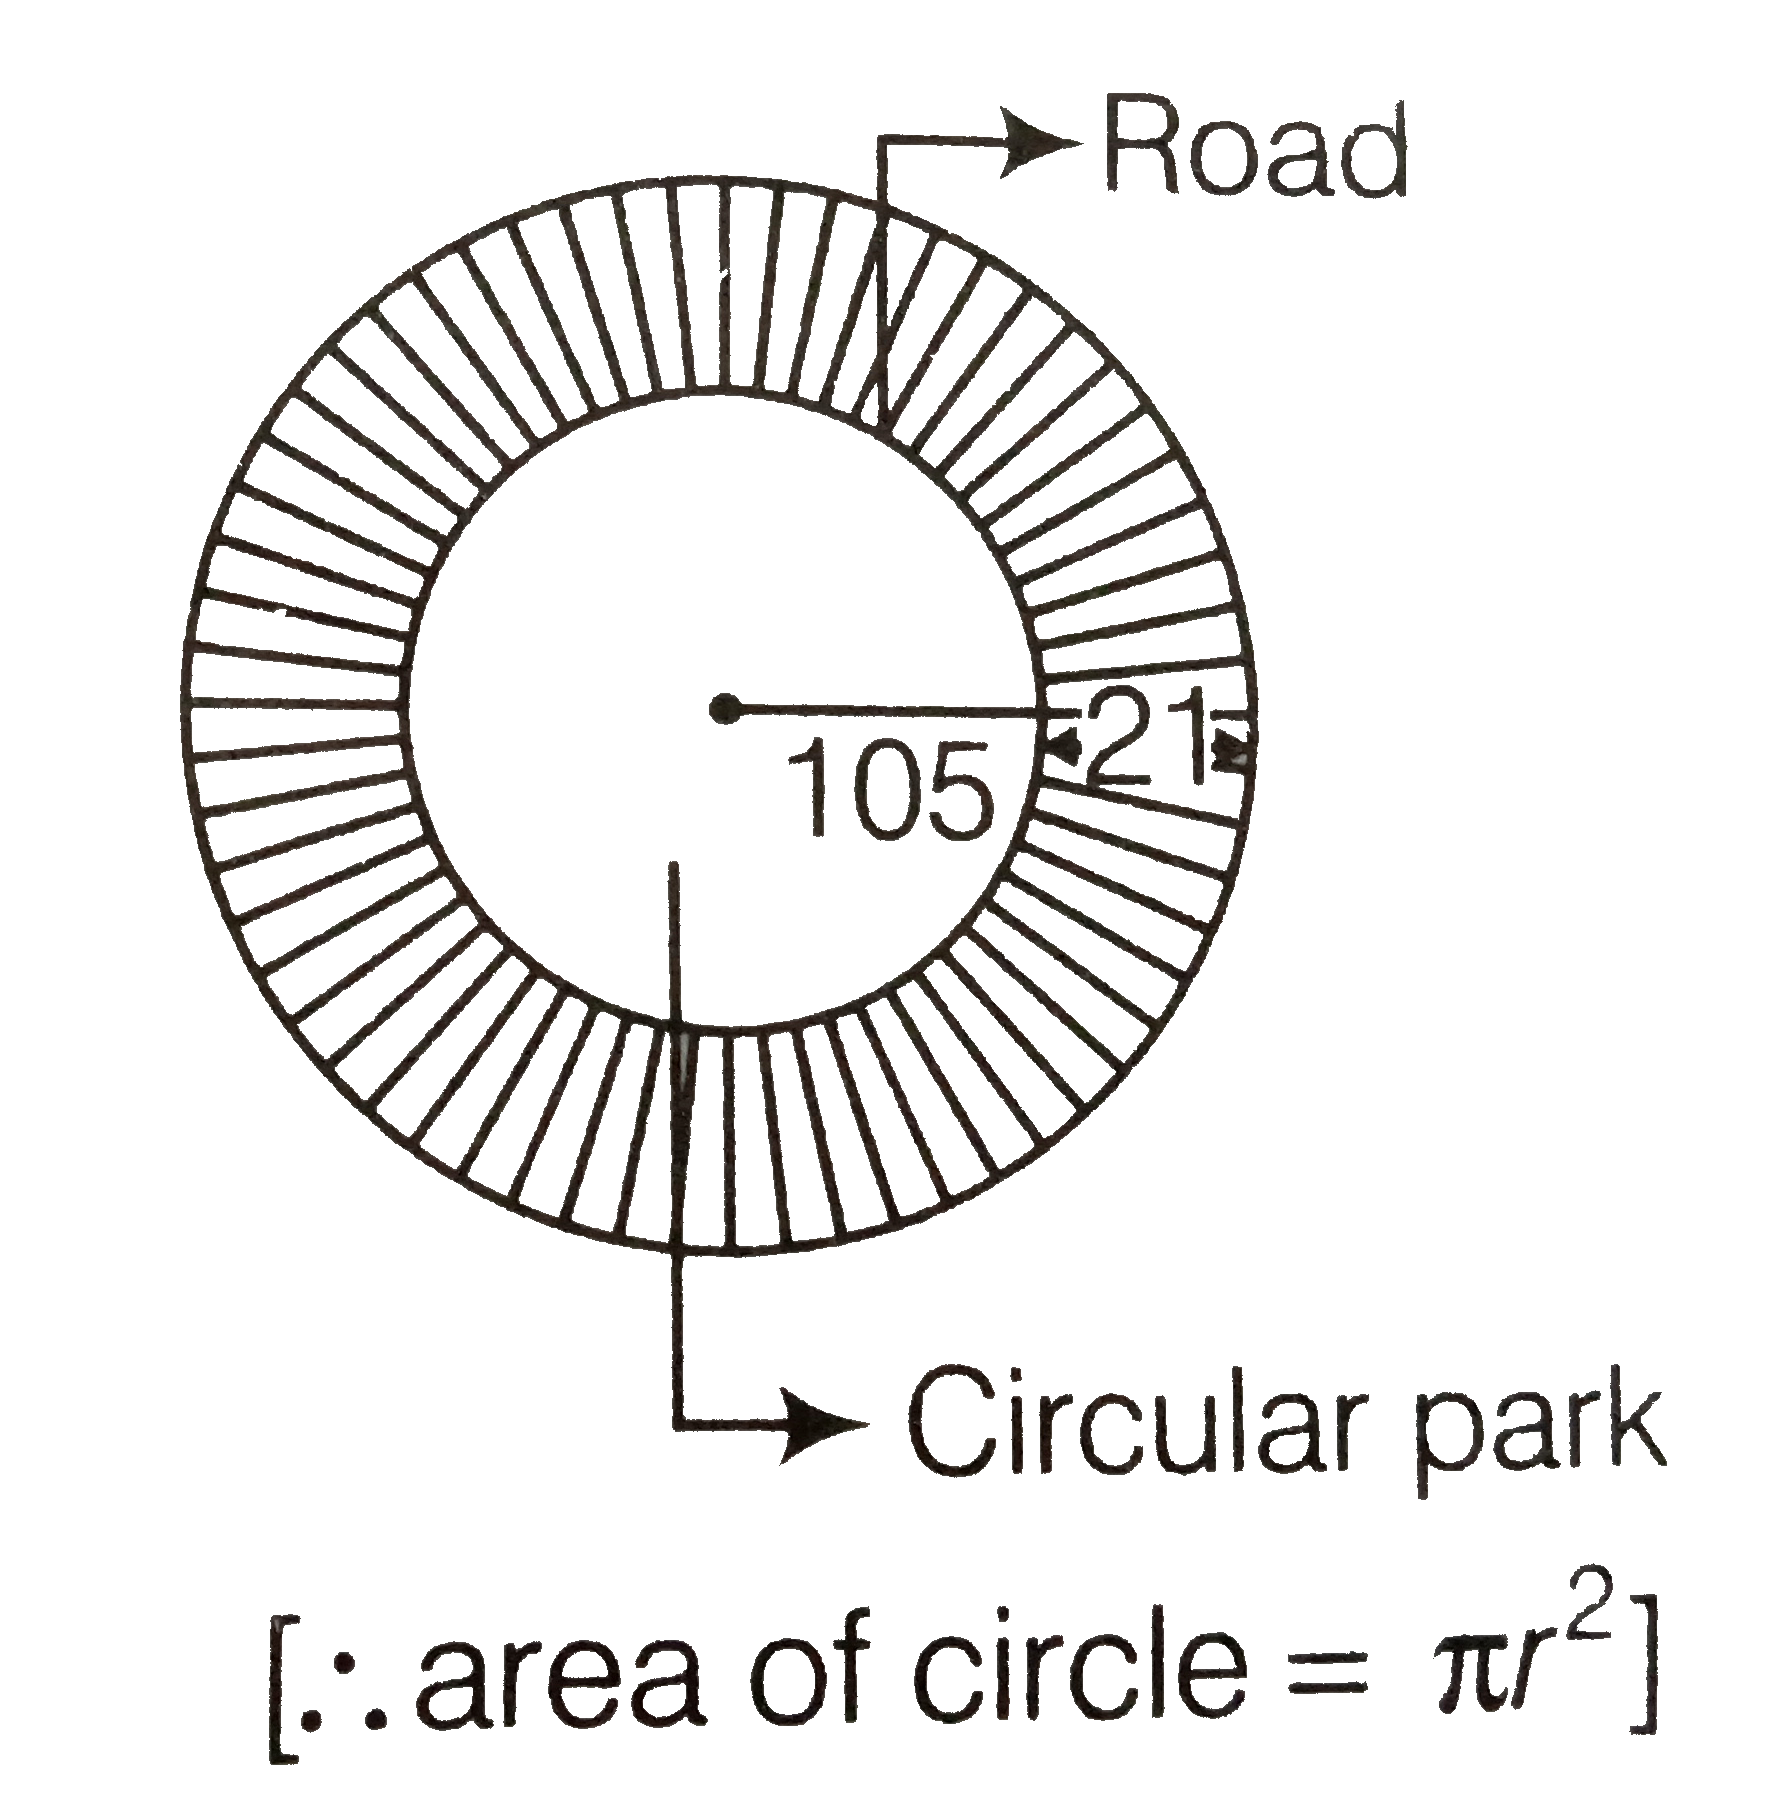 A circular park is surrounded by a road 21 m wide. If the radius of the park is 105 m, then find the area of the road.